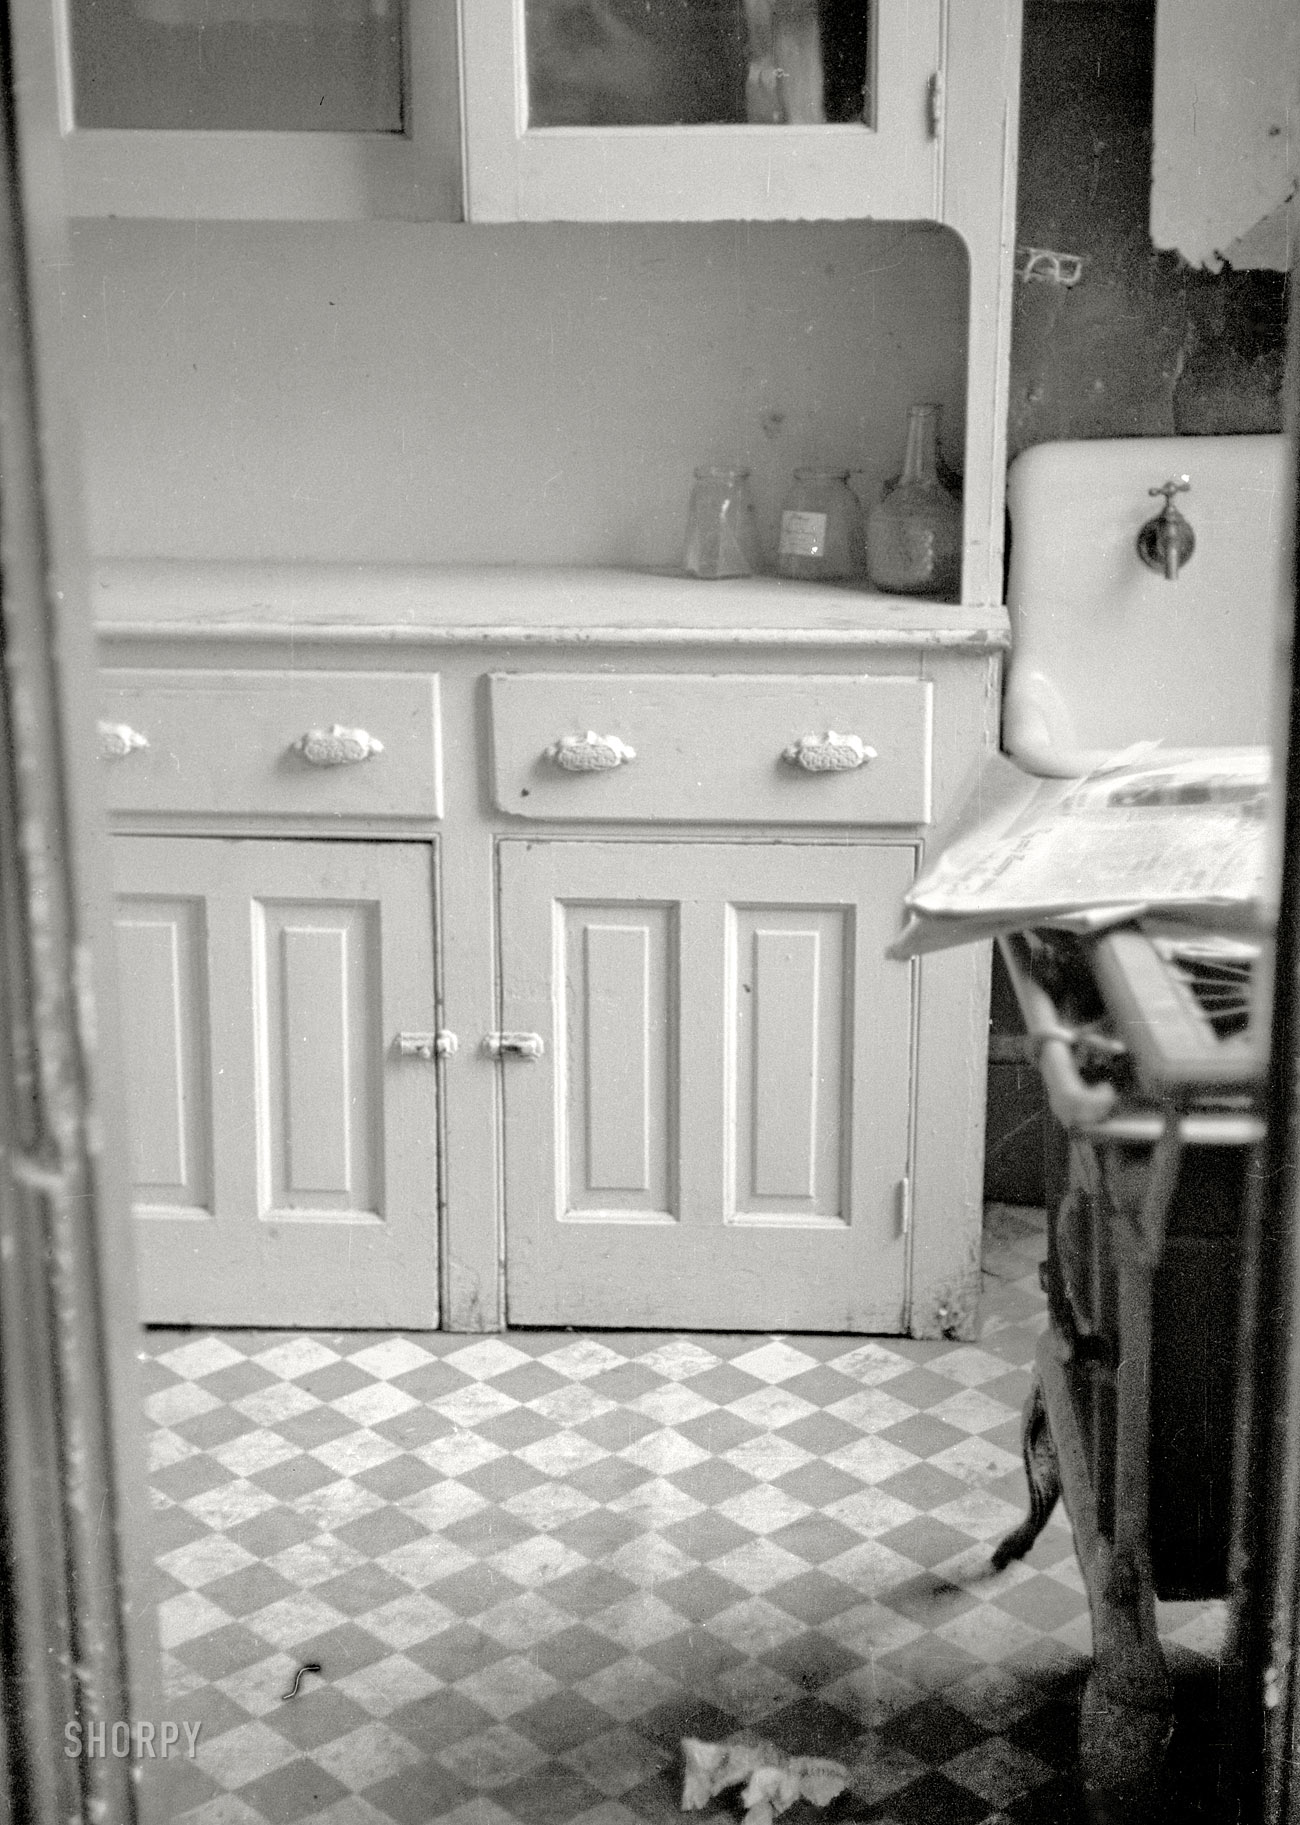 July 1935. "Kitchen of an apartment available for rent in the District of Columbia." One of hundreds of photographs taken by Carl Mydans to document housing conditions in the poorer sections of Washington, D.C., during the Depression. 35mm nitrate negative for the Resettlement Administration. View full size. 